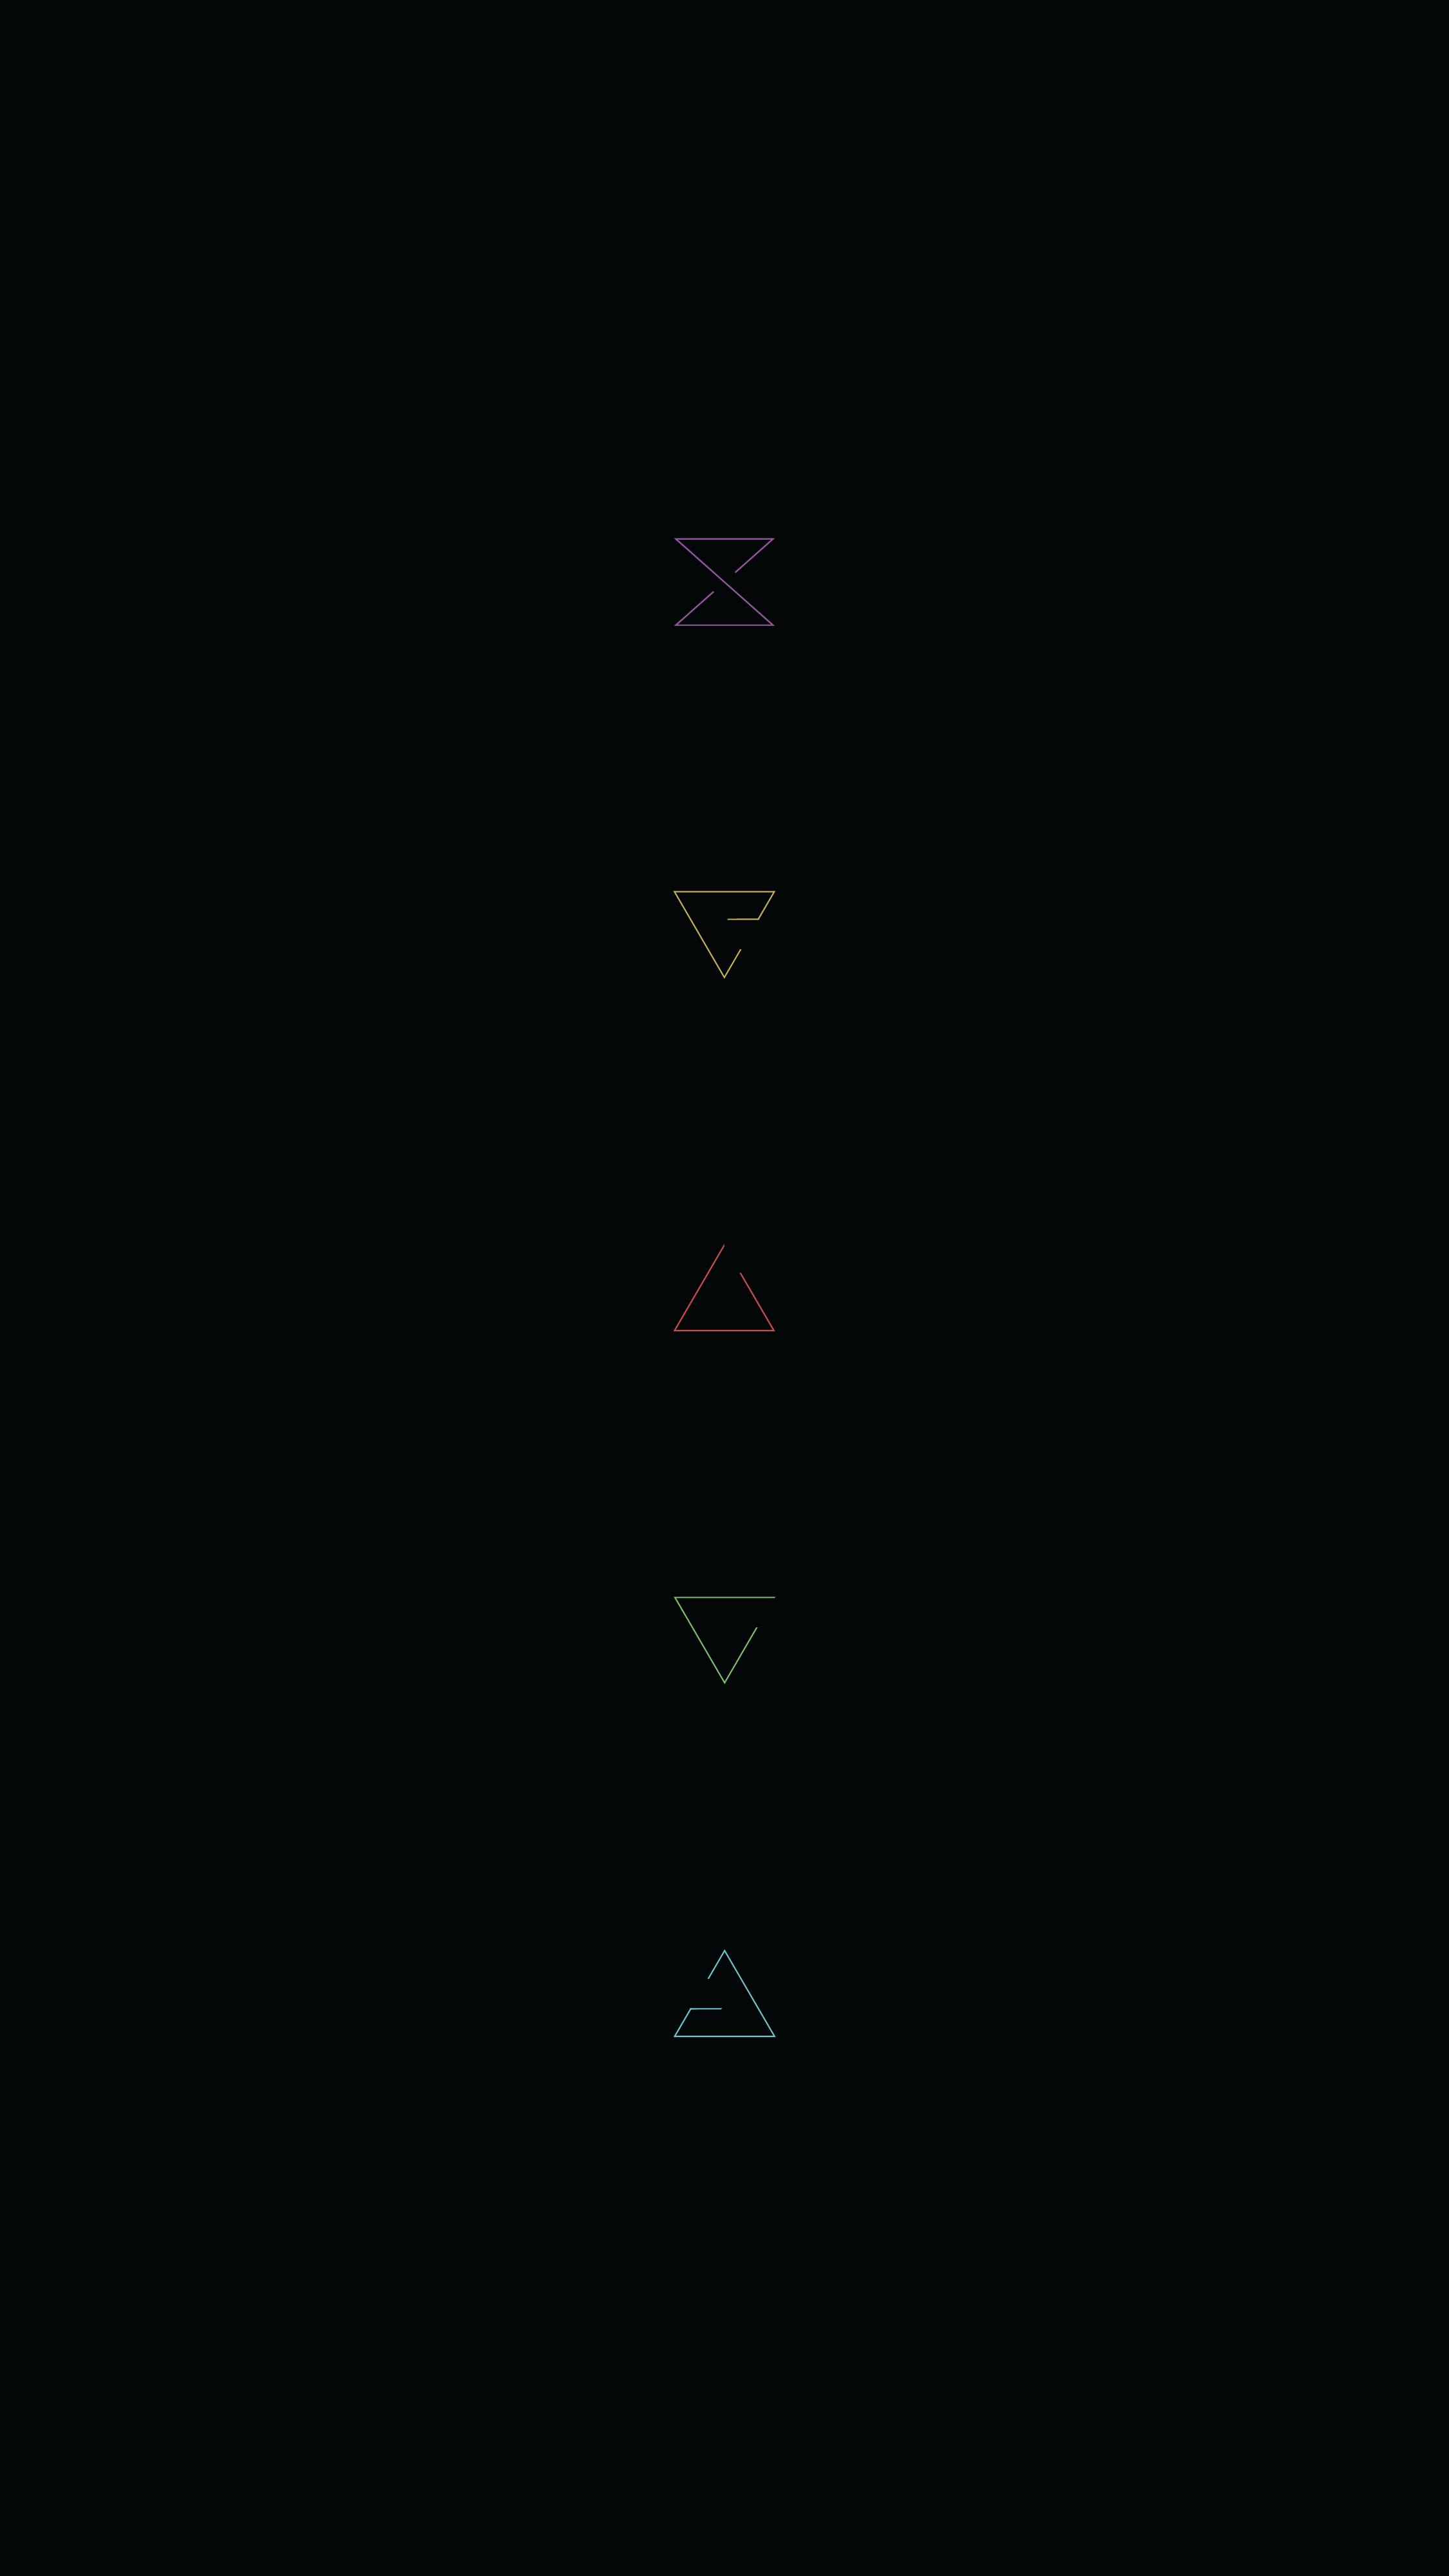 A minimal mobile wallpaper with Witcher's signs :)